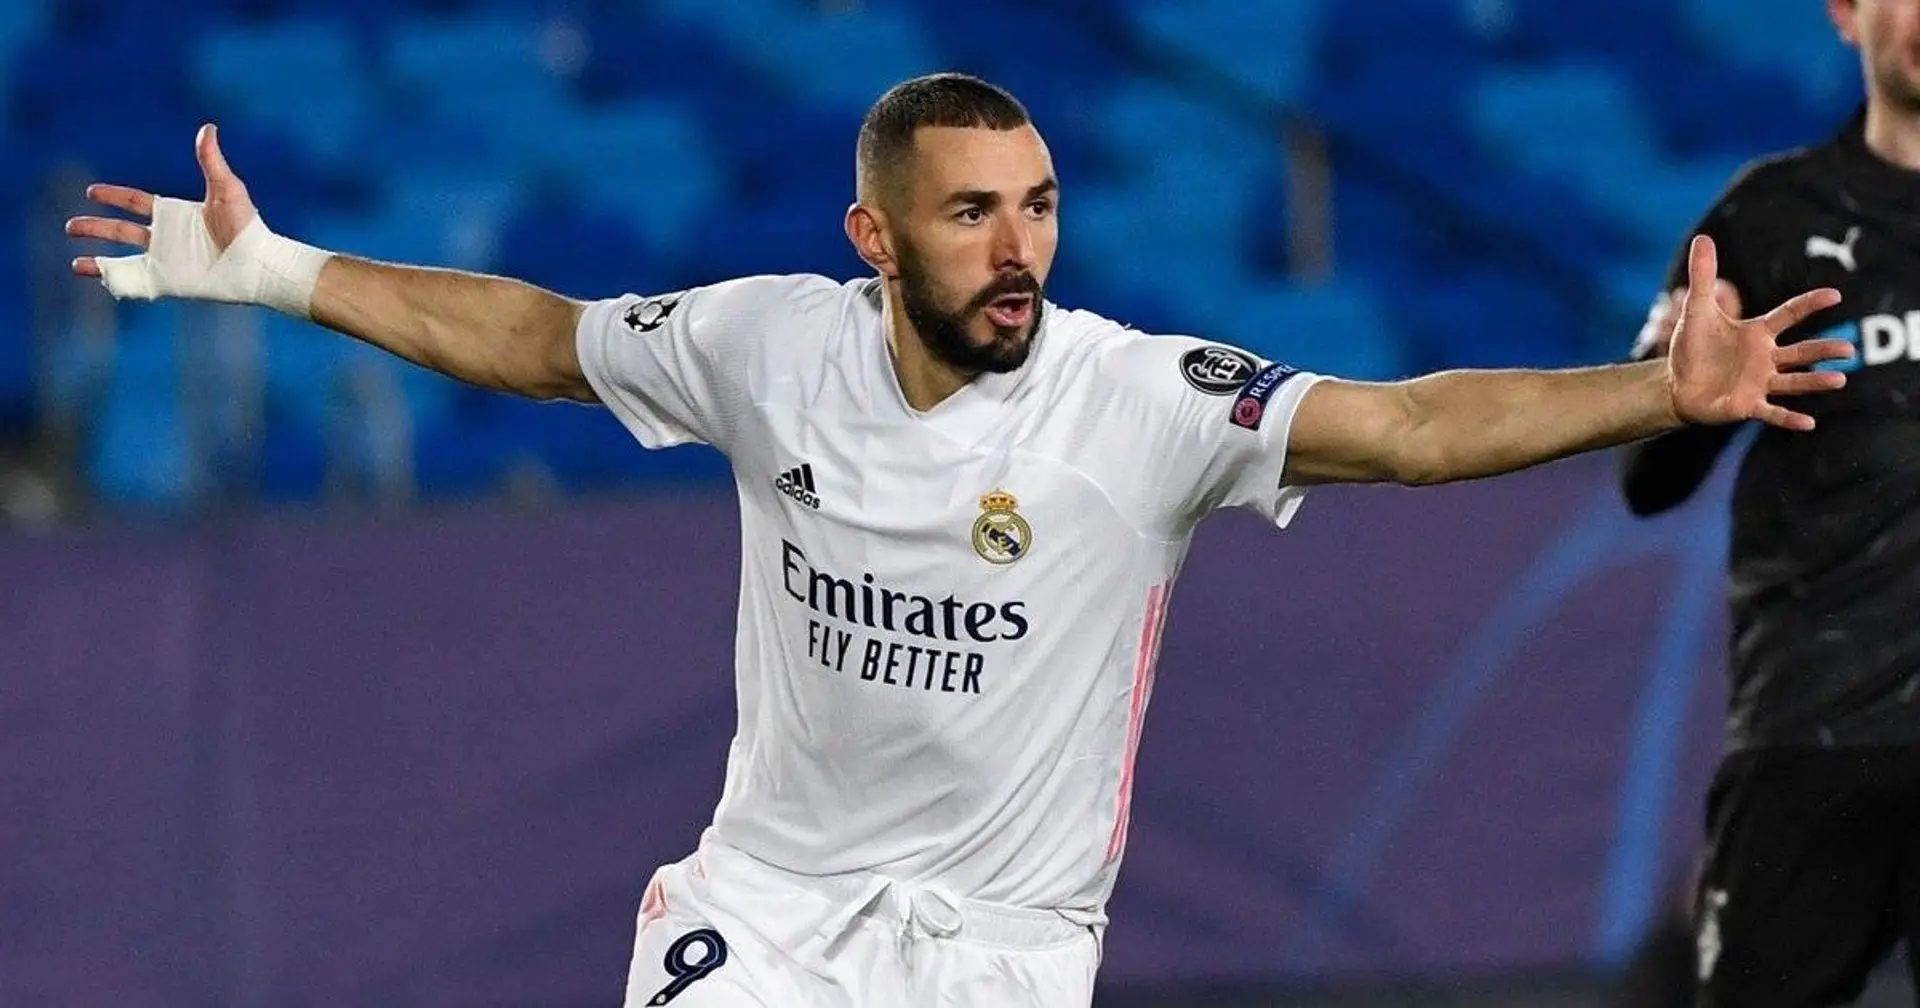 How Karim Benzema ranks among players with most goal contributions in 2020